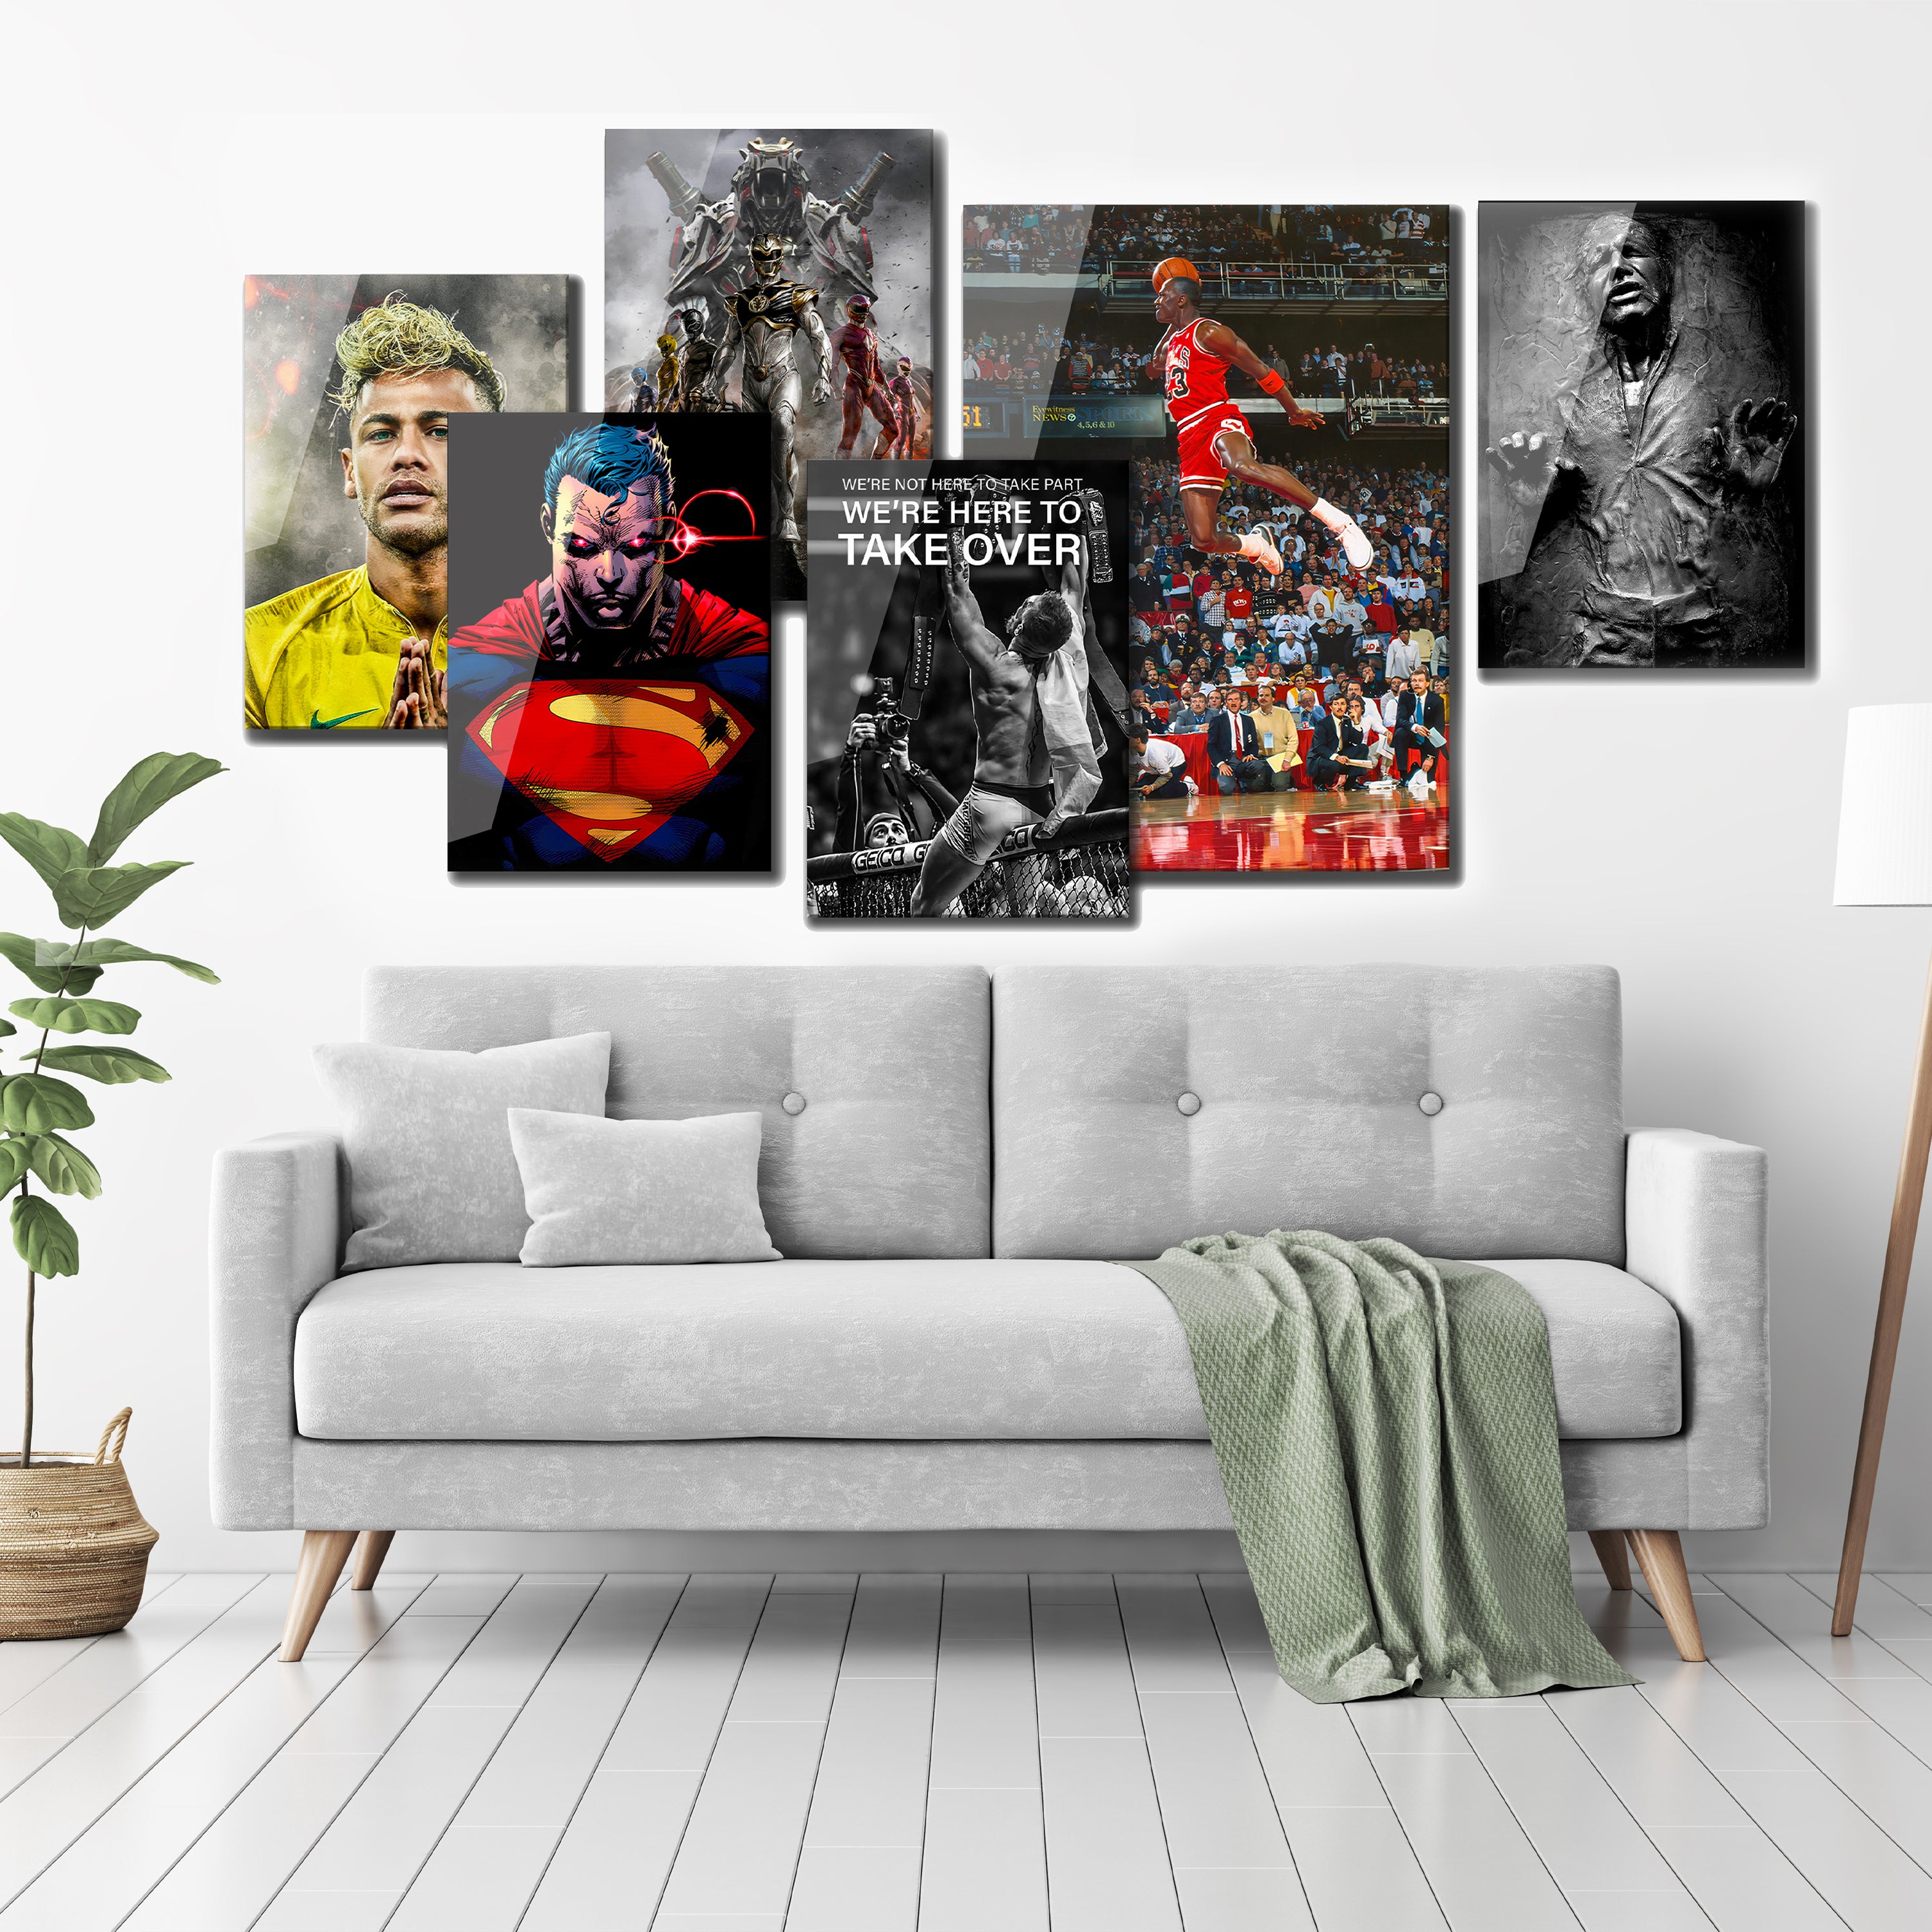 Custom Metal Print - Upload any image or file and we will it on metal for you